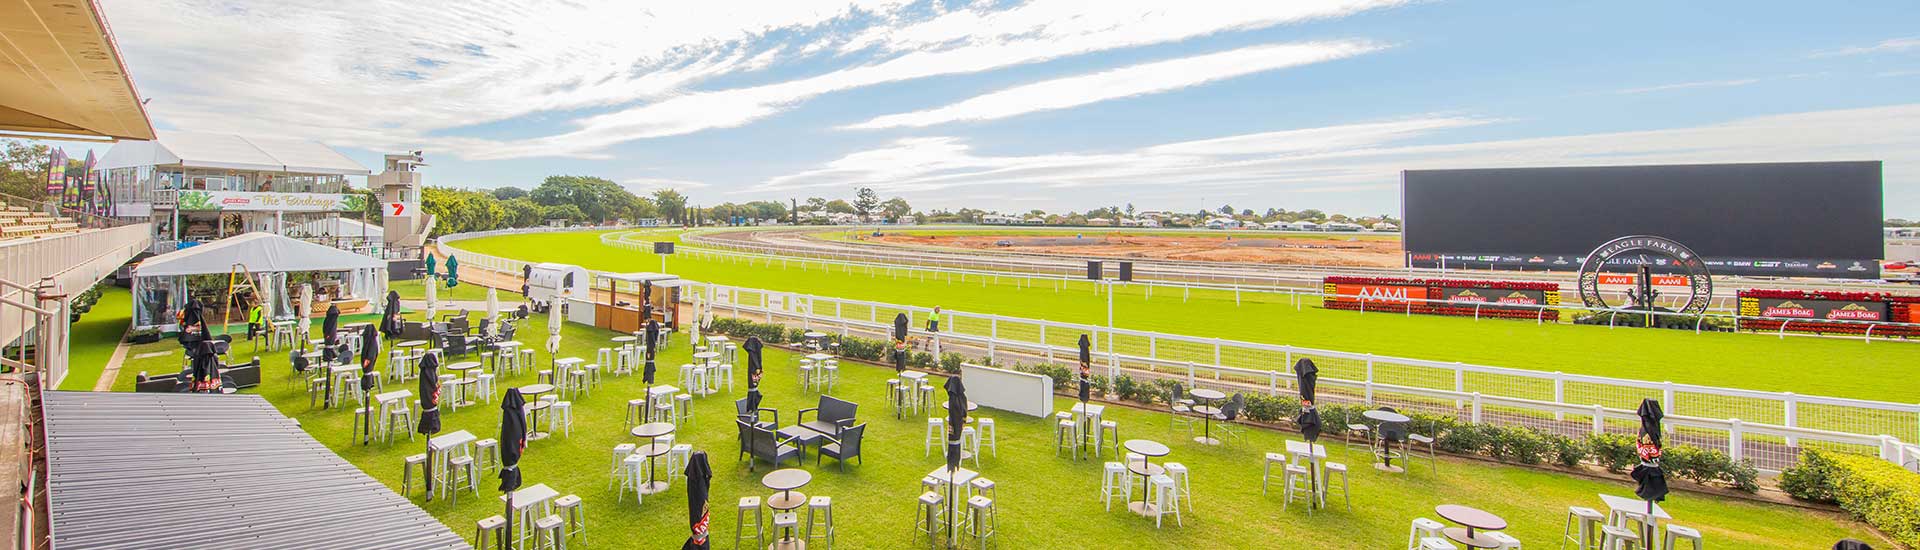 Brisbane Racing Club can provide a beautiful backdrop to your large scale outdoor event including festivals, fairs, markets and more